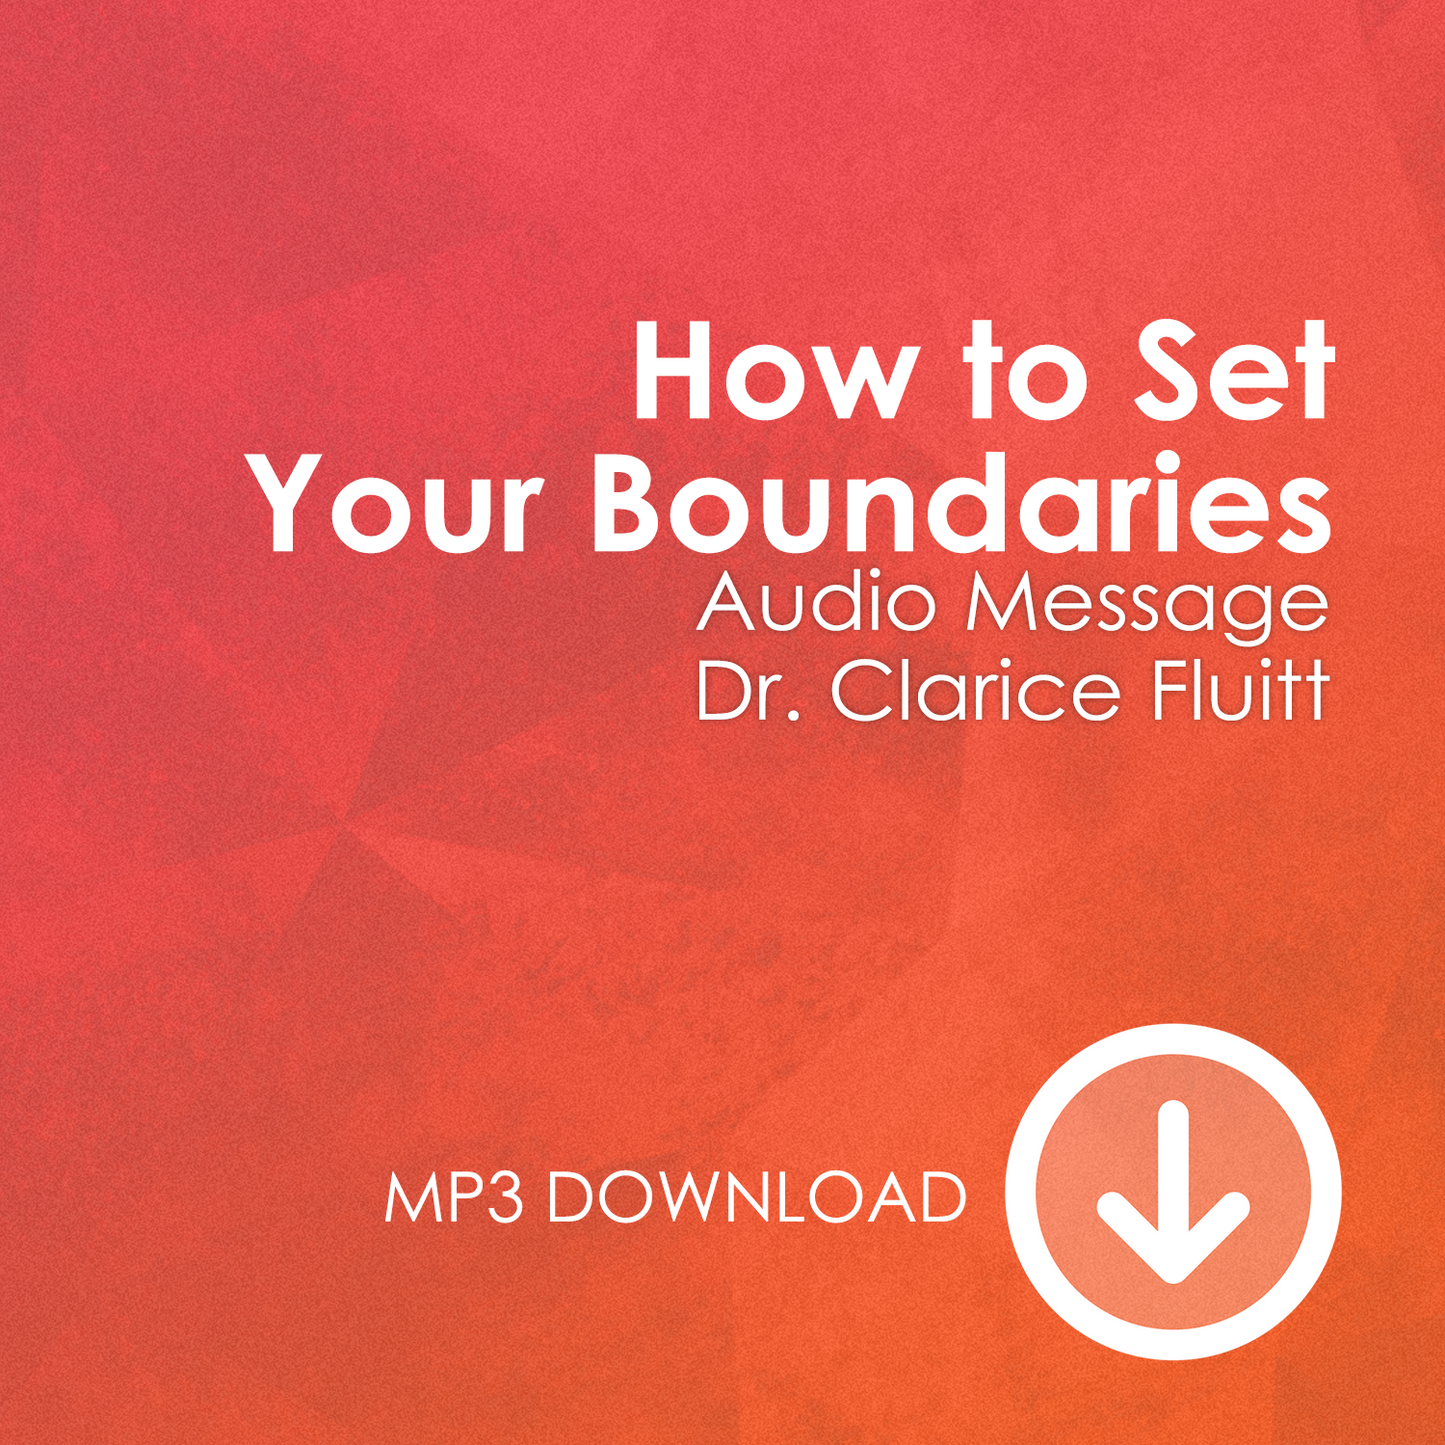 How to Set Your Boundaries MP3